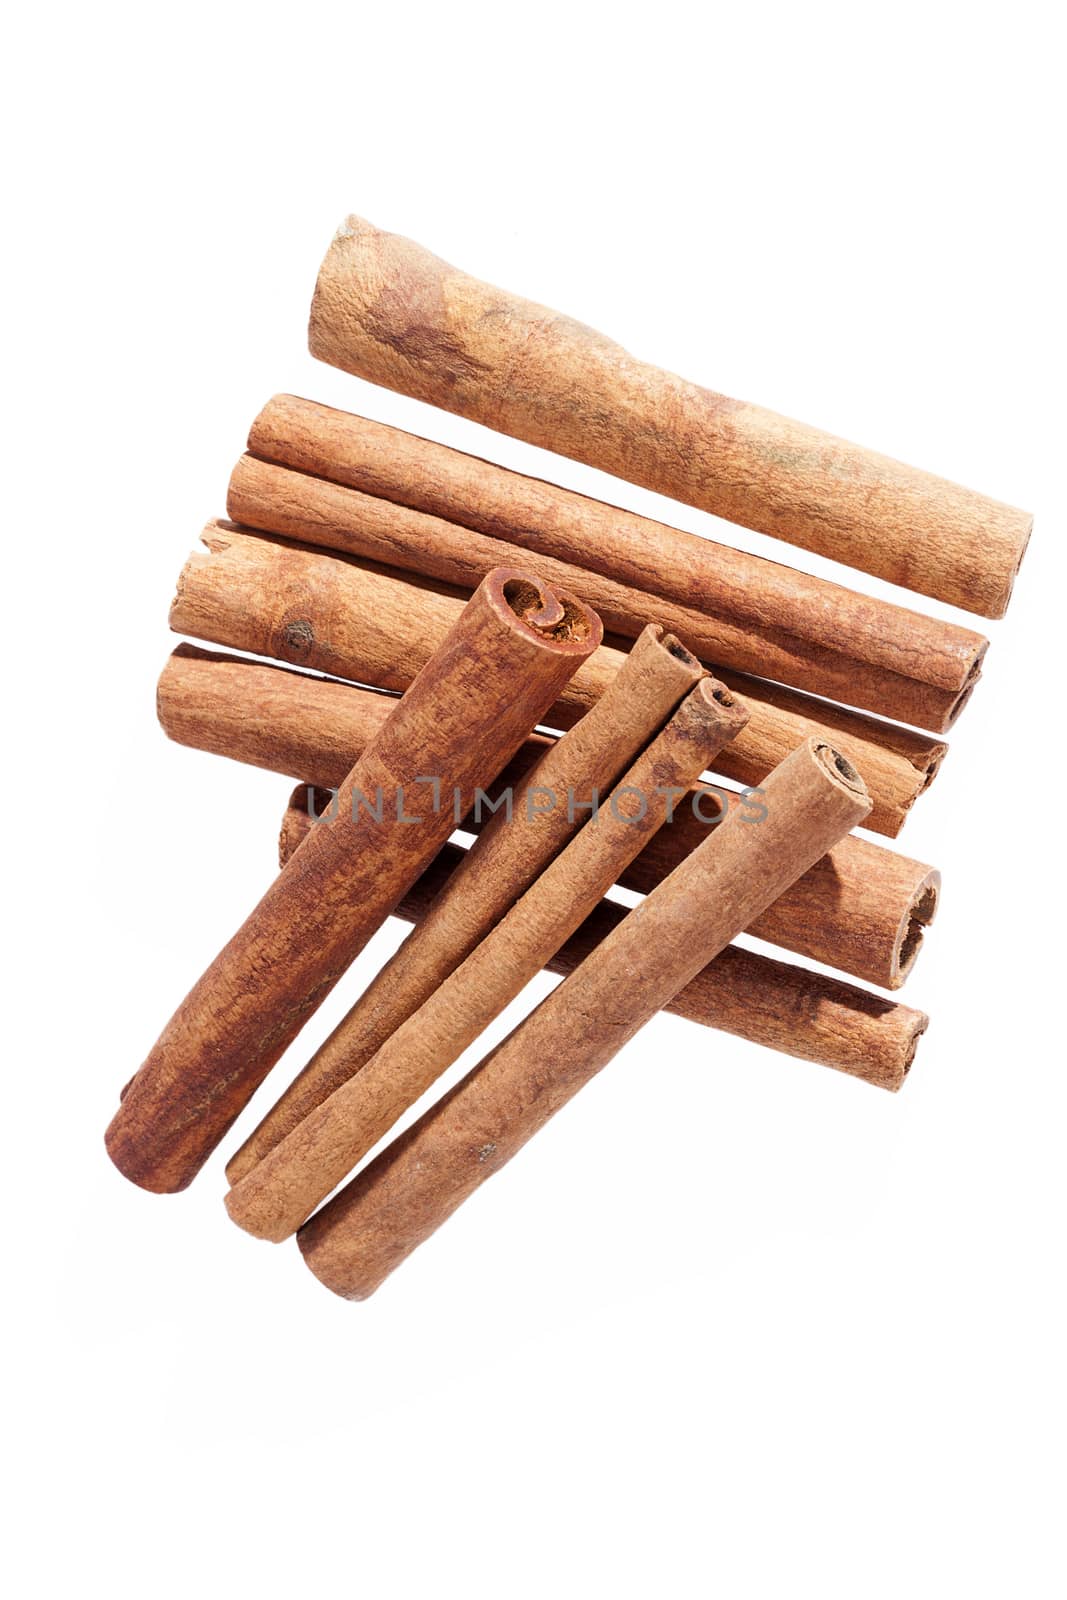 Cinnamon sticks isolated on white background, close up by mychadre77